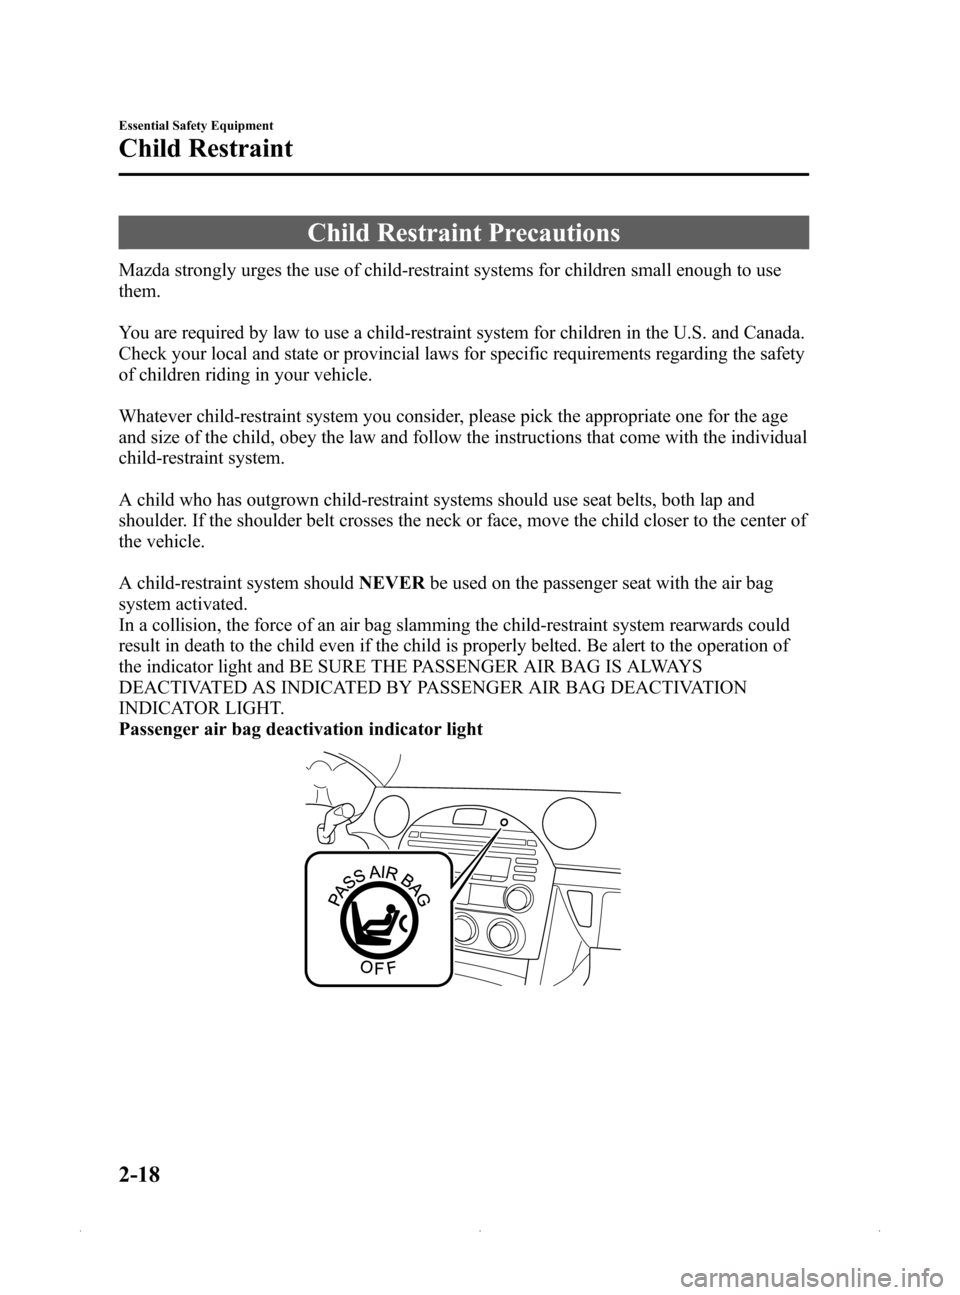 MAZDA MODEL MX-5 PRHT 2015   (in English) Owners Manual Black plate (30,1)
Child Restraint Precautions
Mazda strongly urges the use of child-restraint systems for children small enough to use
them.
You are required by law to use a child-restraint system fo